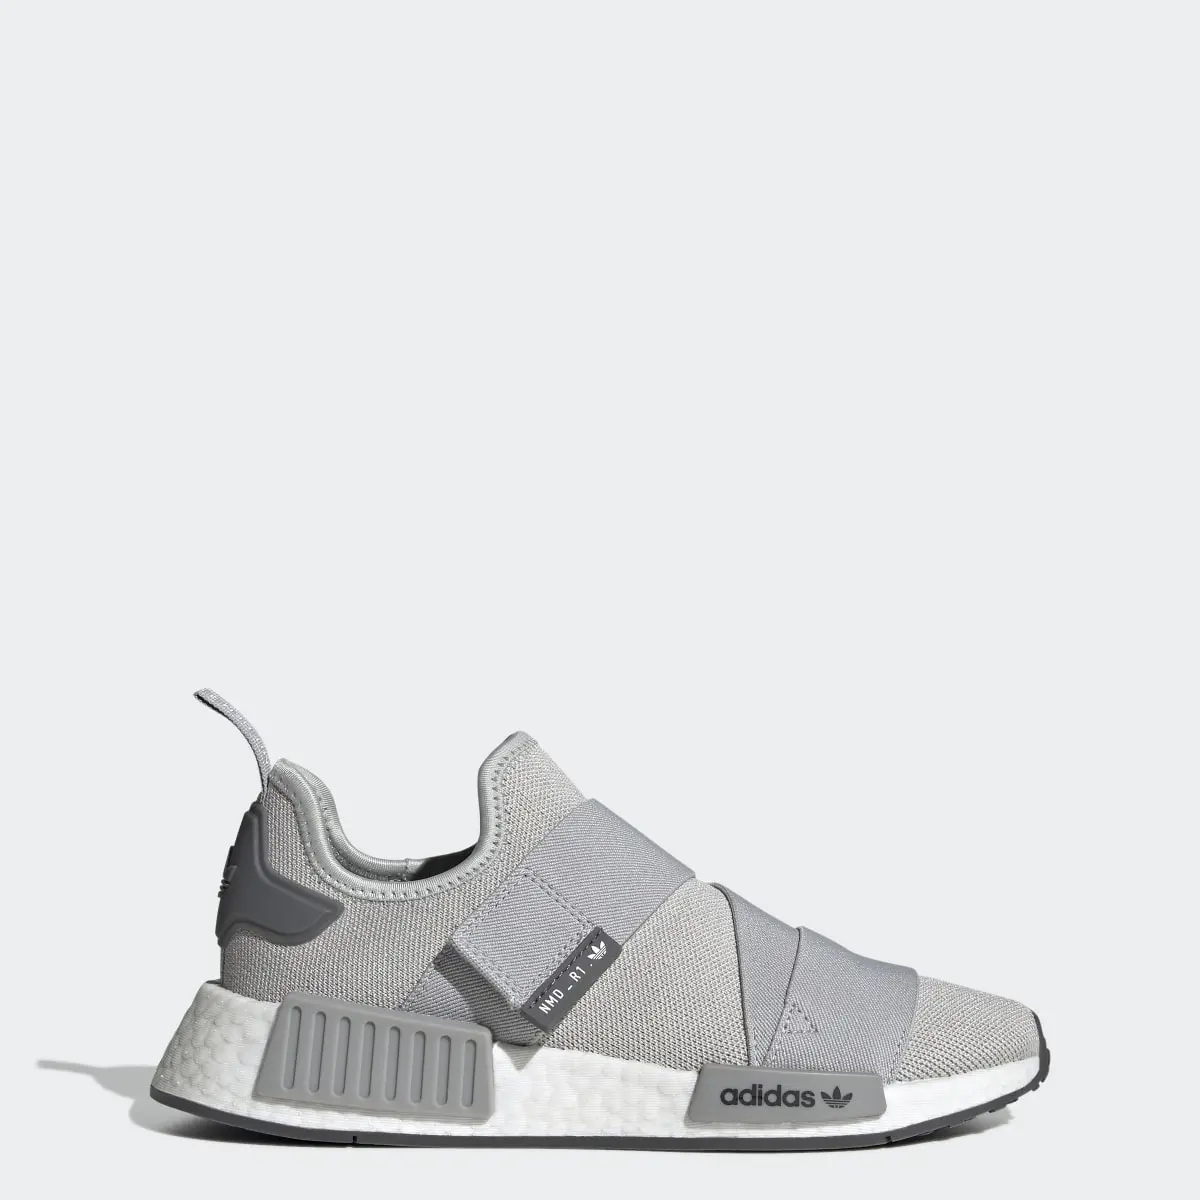 Adidas NMD_R1 Strap Shoes. 1